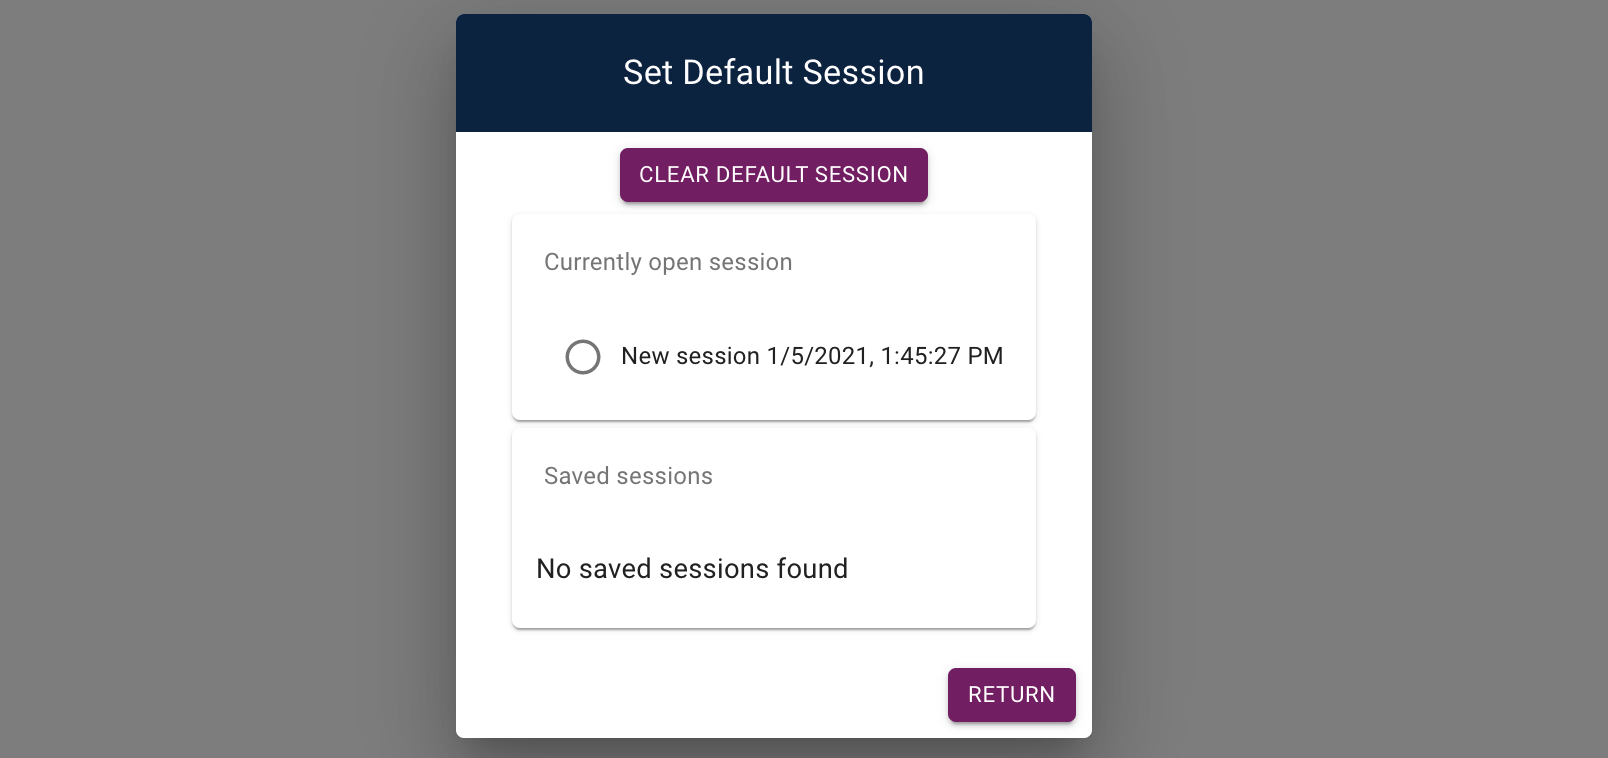 The 'Set default session' will persist your current session into the config file so any subsequent visitors to the app will see this session